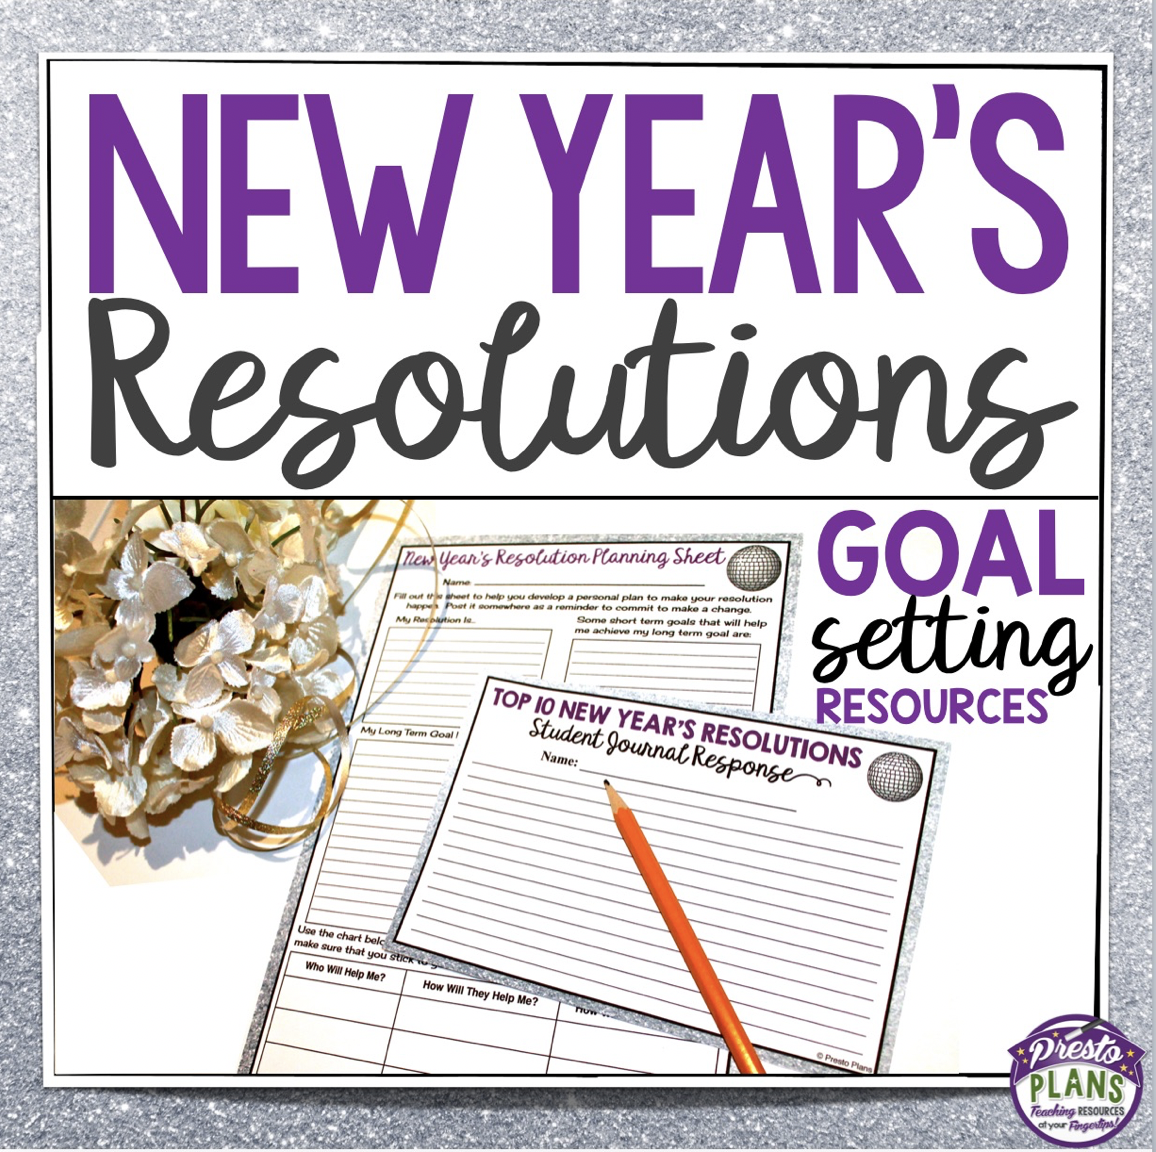 New years resolutions is. What are the New year Resolutions. New year goals. What's your New year Resolution. Smart goals New year.